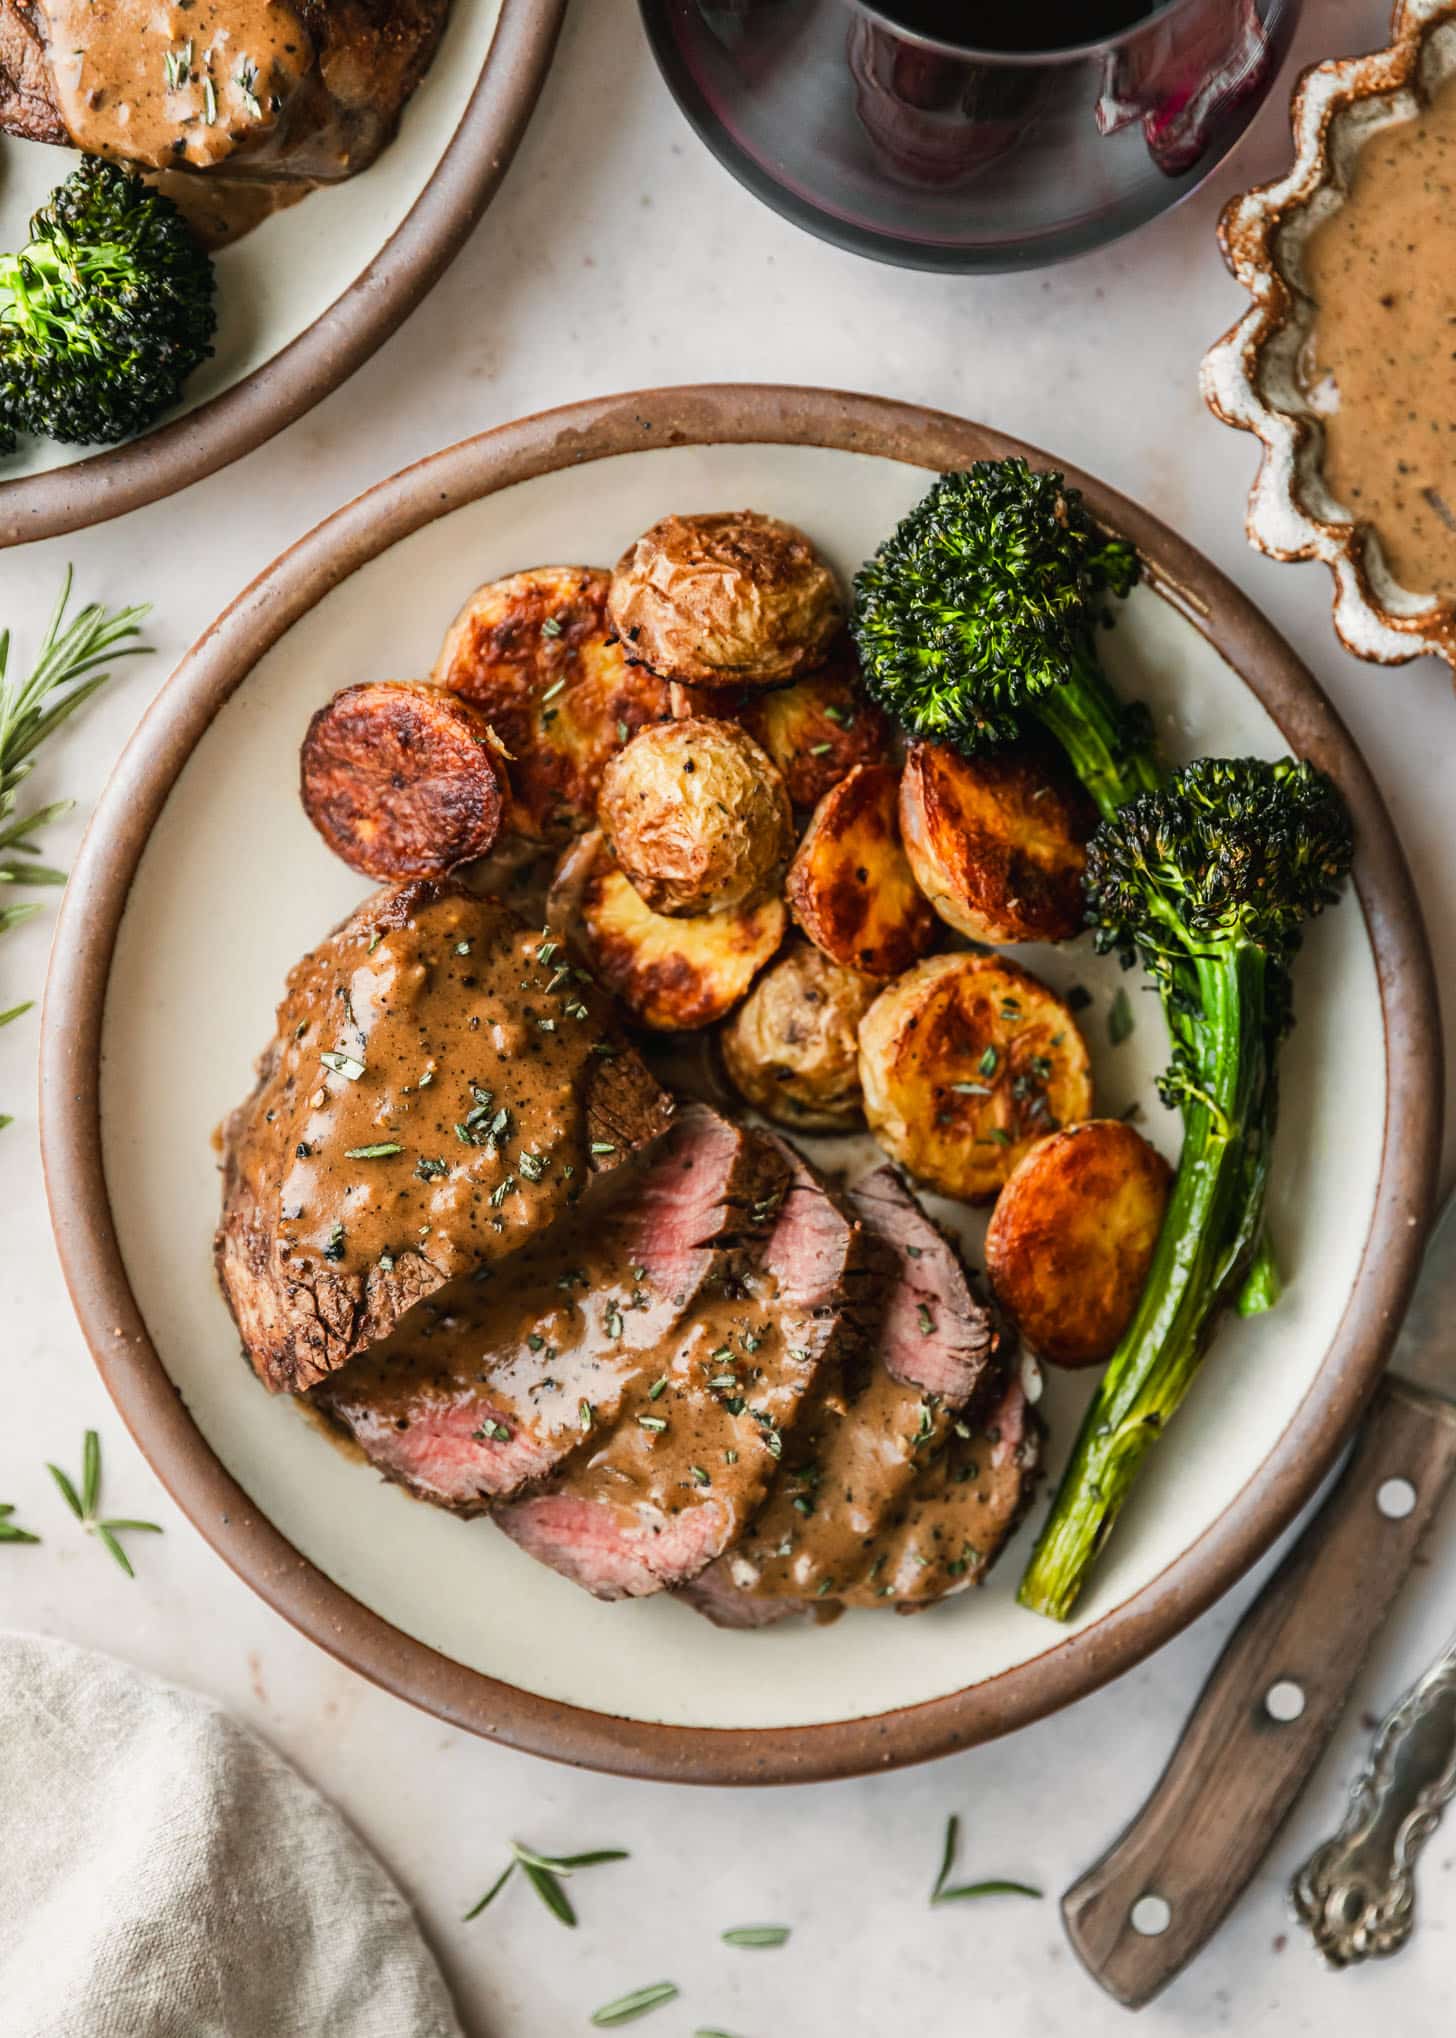 Reverse sear steak, potatoes, and broccolini on a white plate next to red wine, a brown bowl of peppercorn sauce, and a wood steak knife on a marble counter.